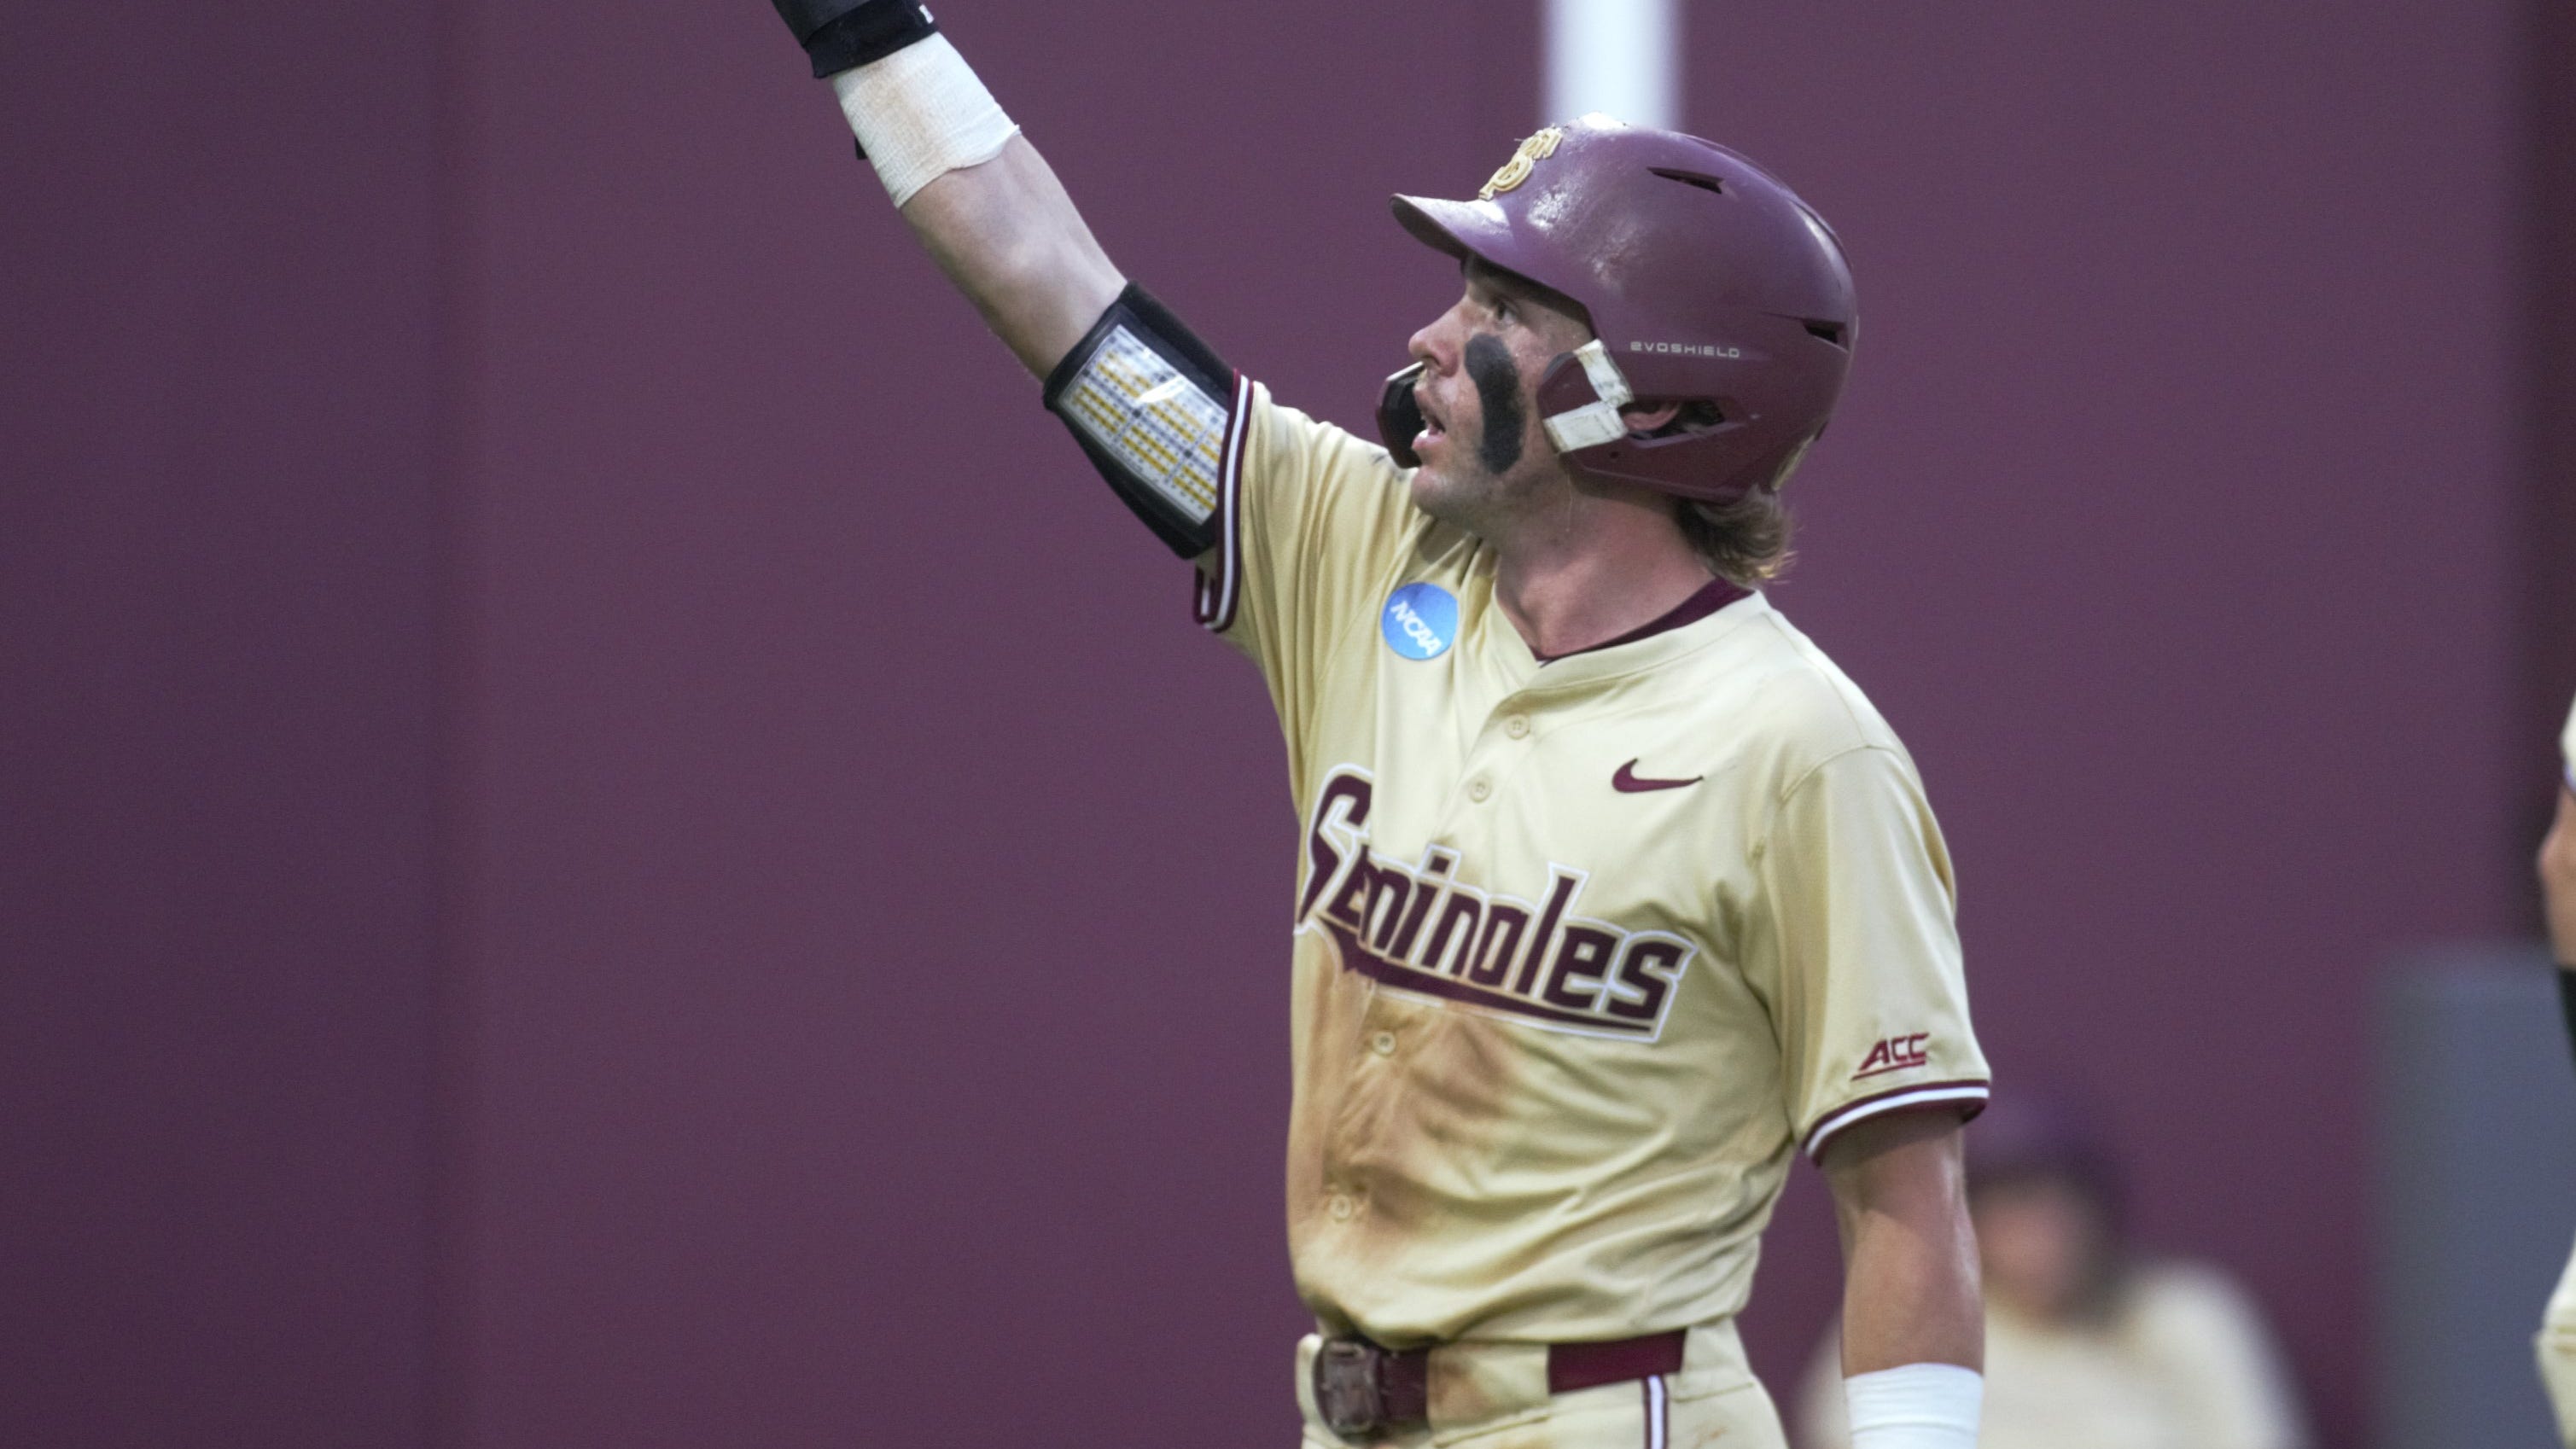 Florida State baseball won by 20 in super regionals. Is there a mercy rule in NCAA tournament?